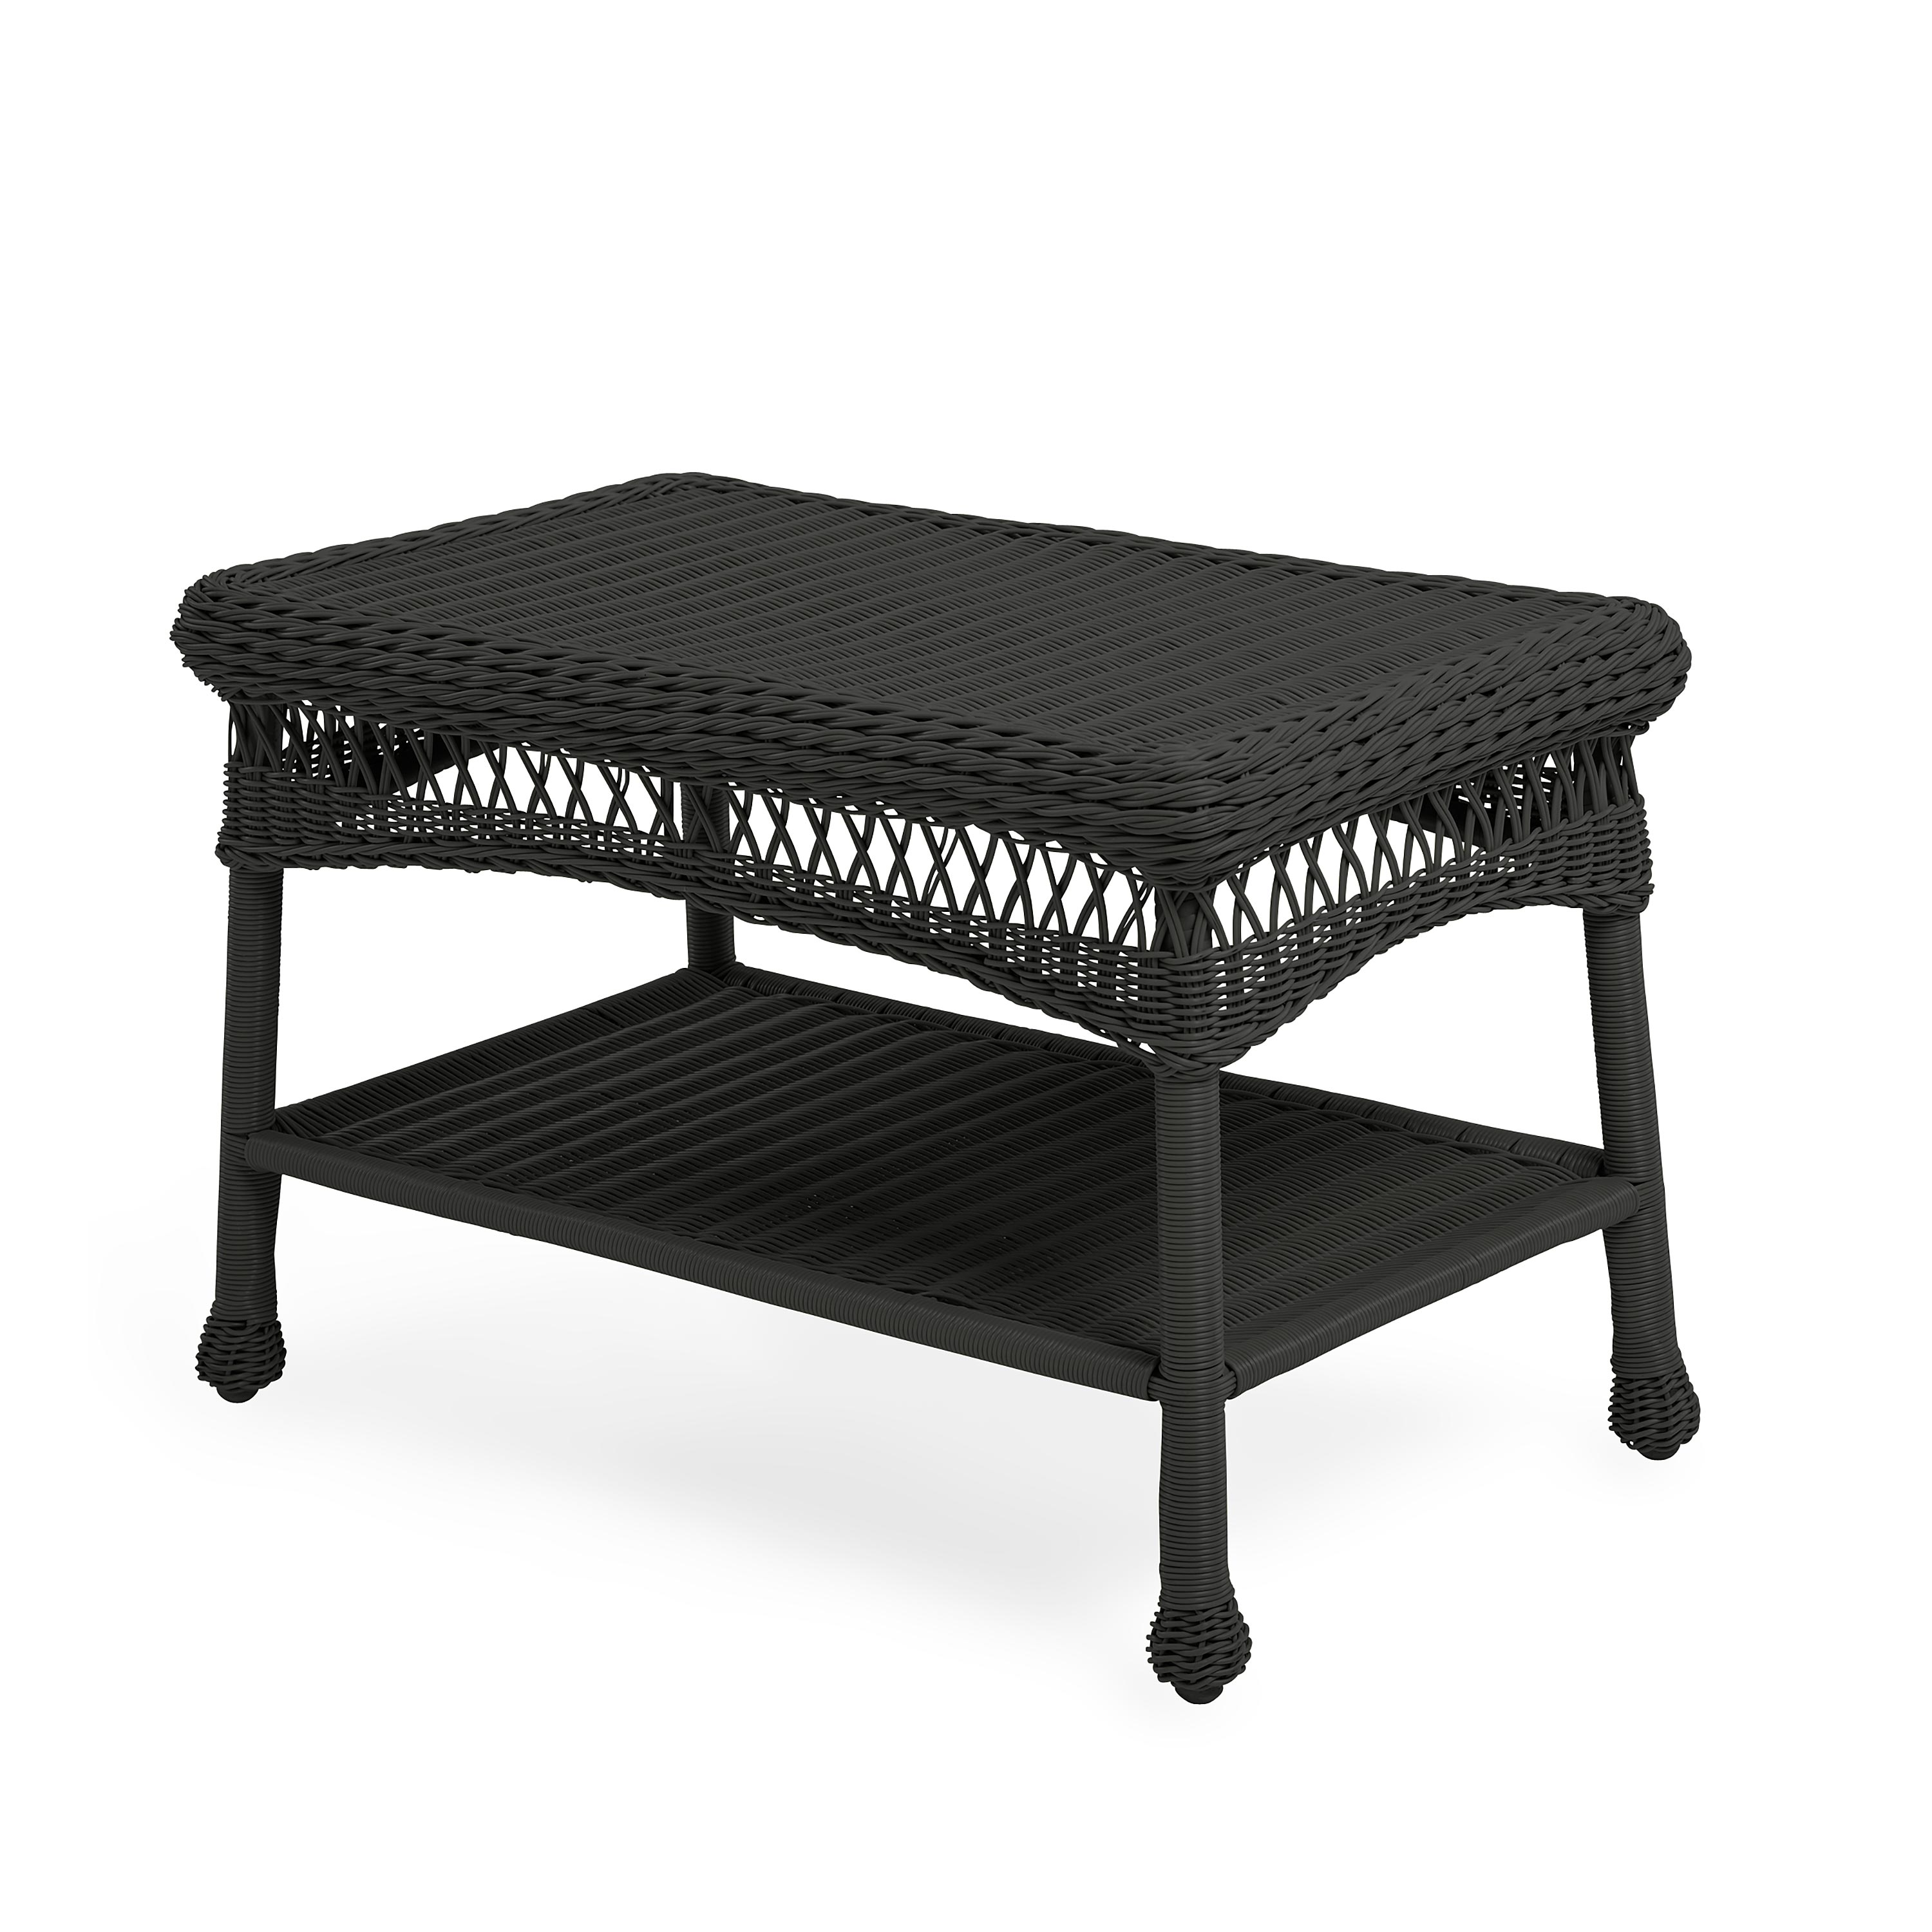 Easy Care Resin Wicker Coffee Table - Black